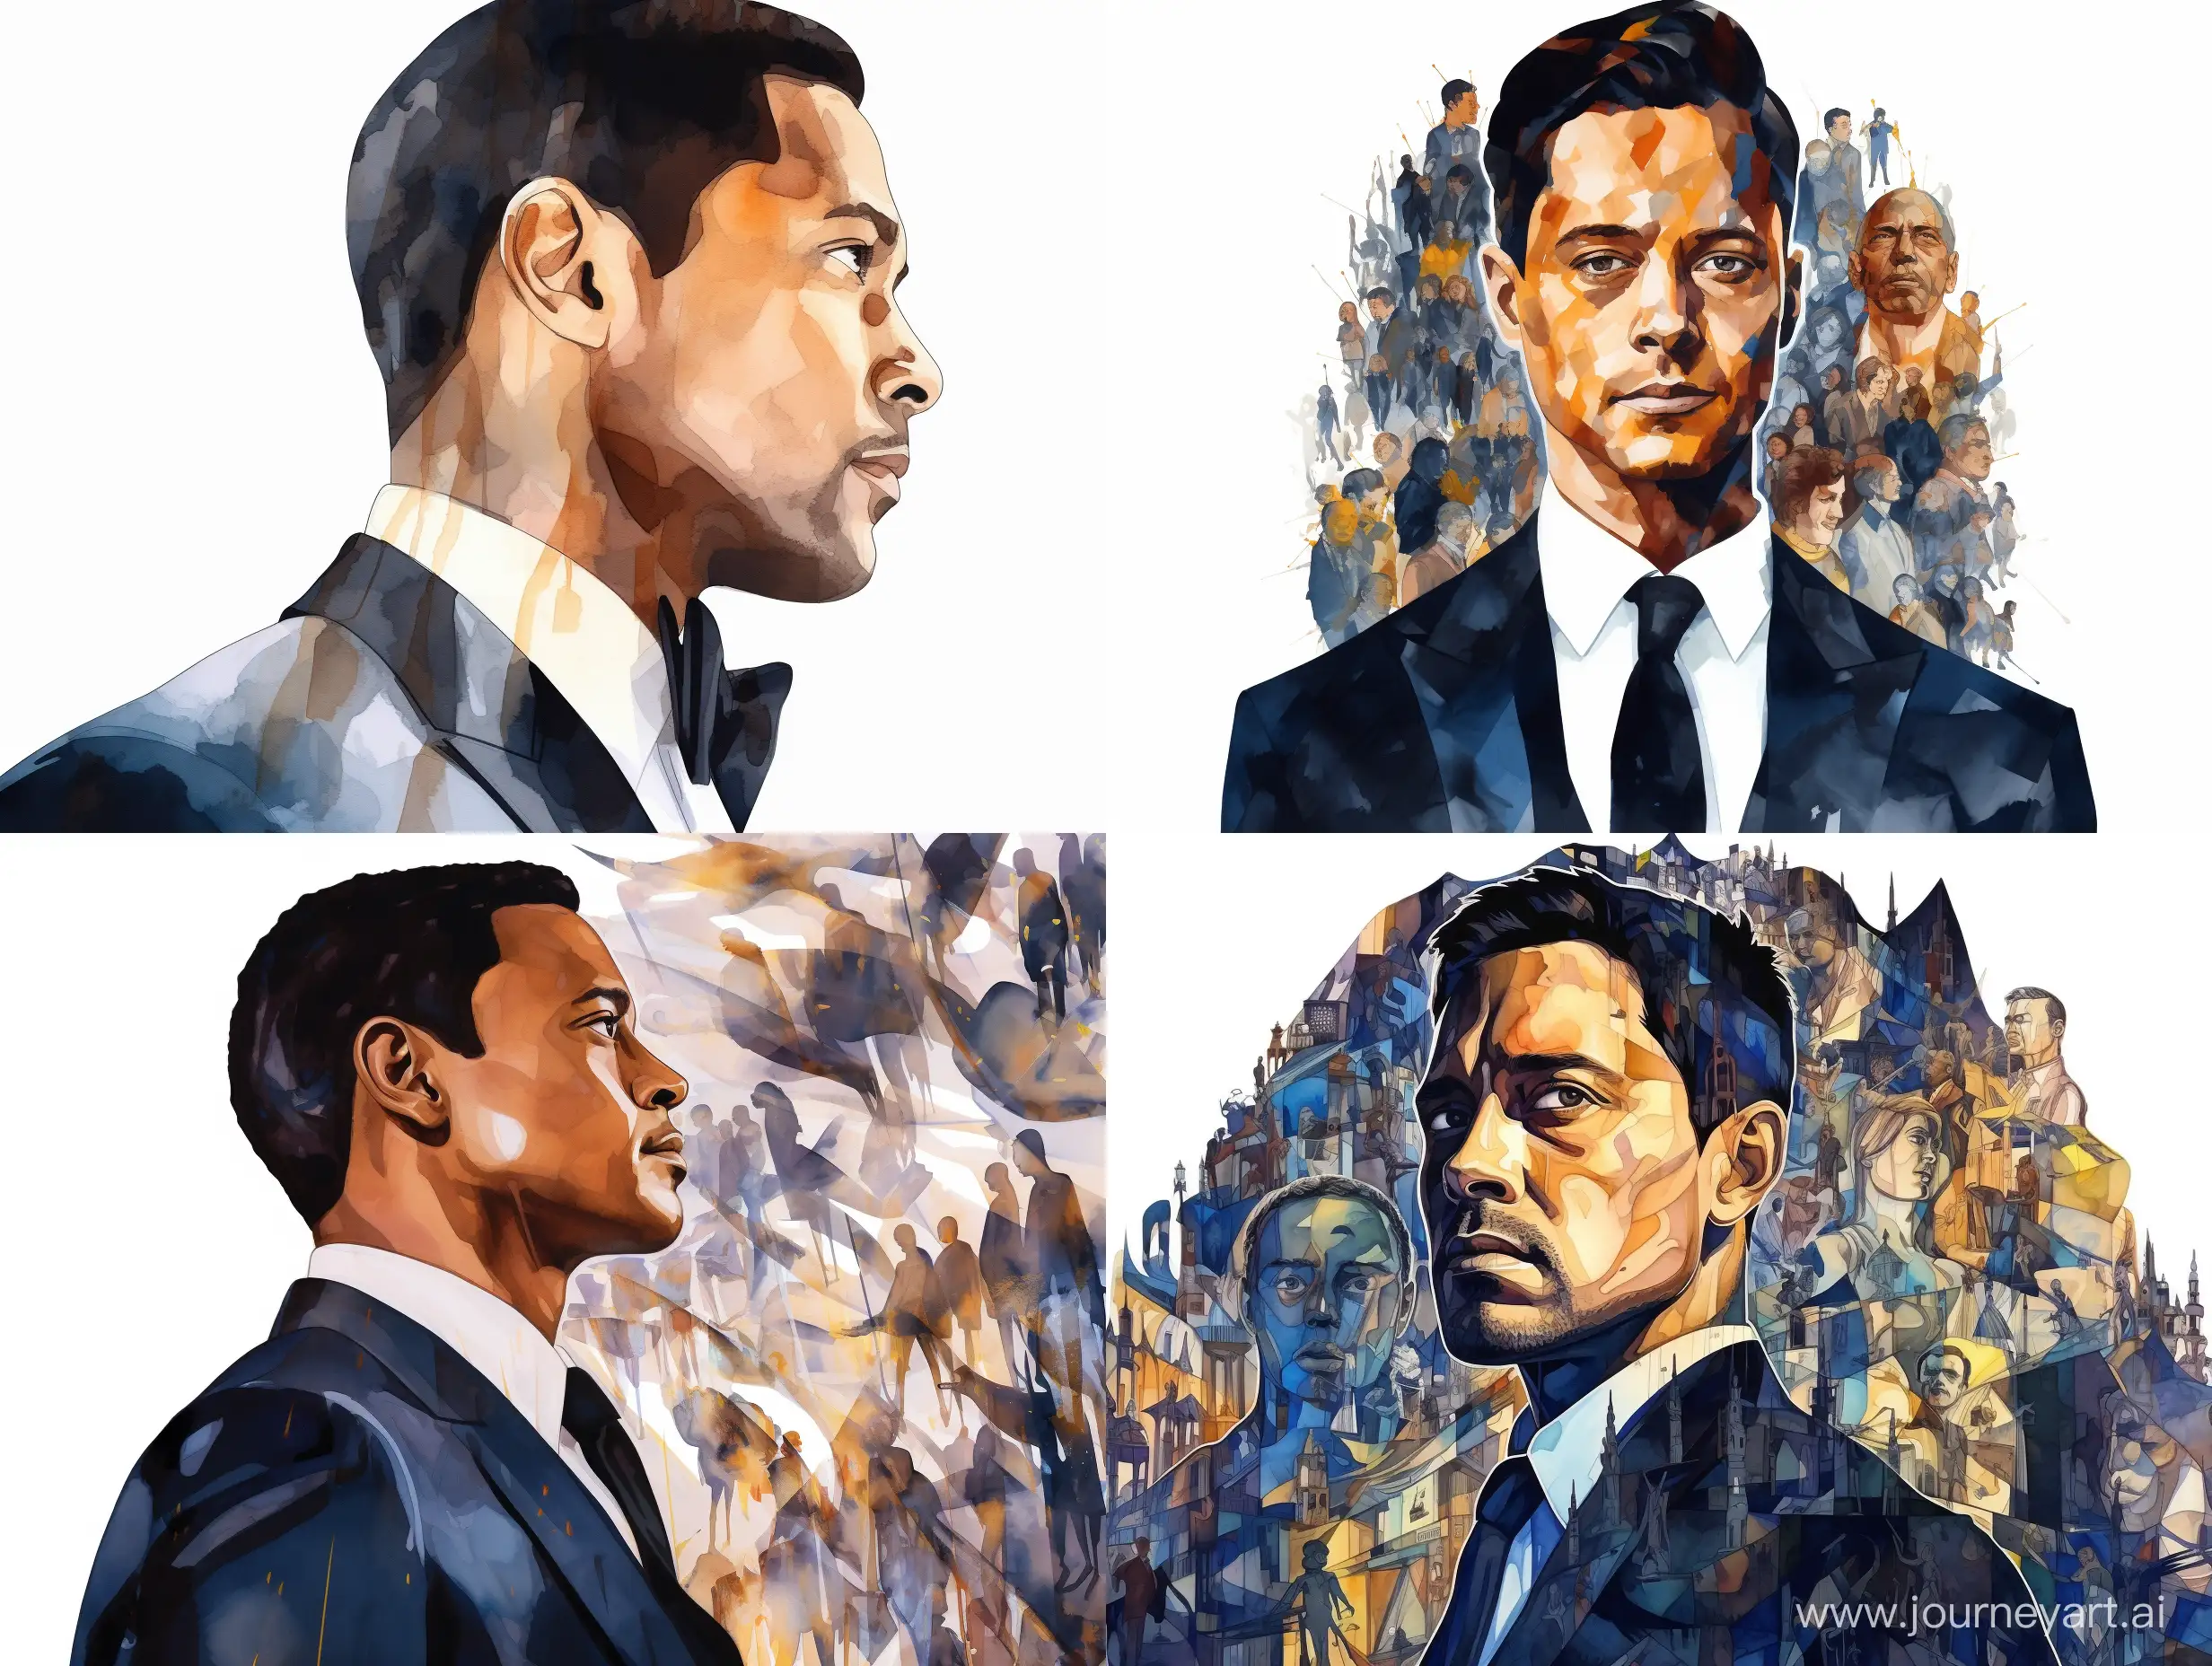 Will-Smith-Men-in-Black-Caricature-Portrait-with-Film-Characters